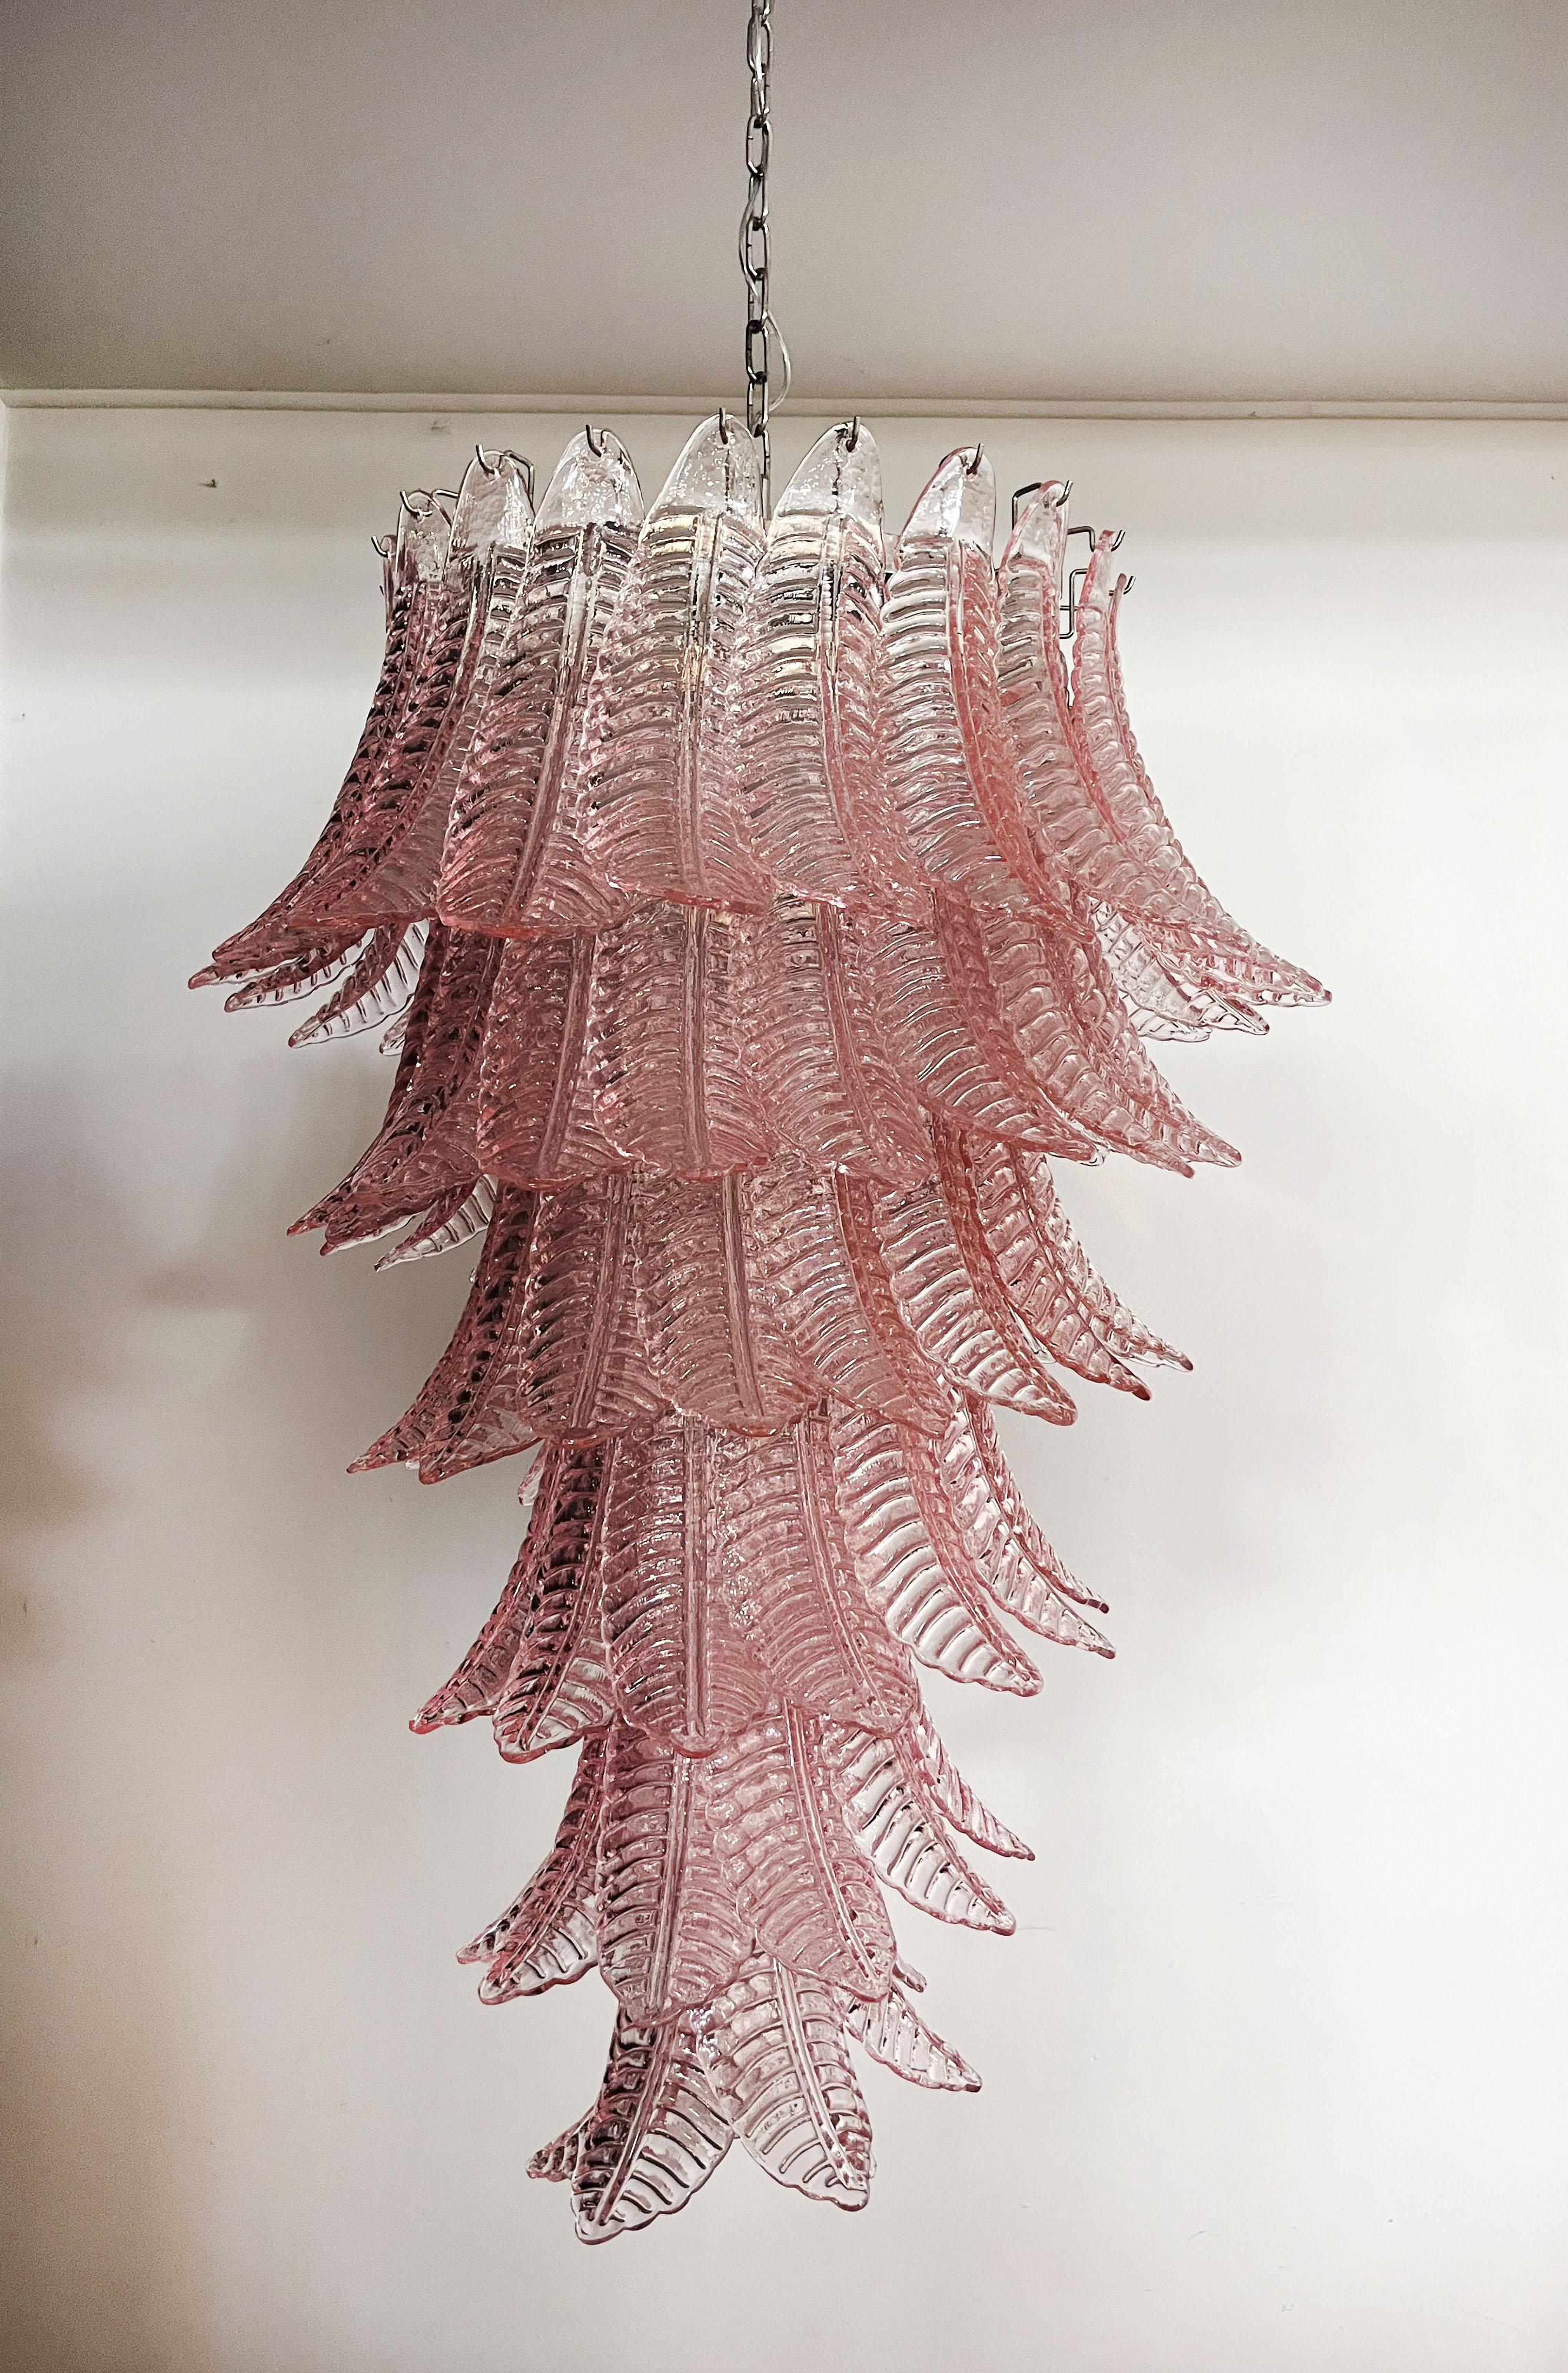 Beautiful and huge Italian Murano Chandelier composed of 83 splendid pink glasses that give a very elegant look. The glasses of this chandelier are real works of art. The glasses descend with a spiral shape.
Dimensions: 71.70 inches (185 cm) height